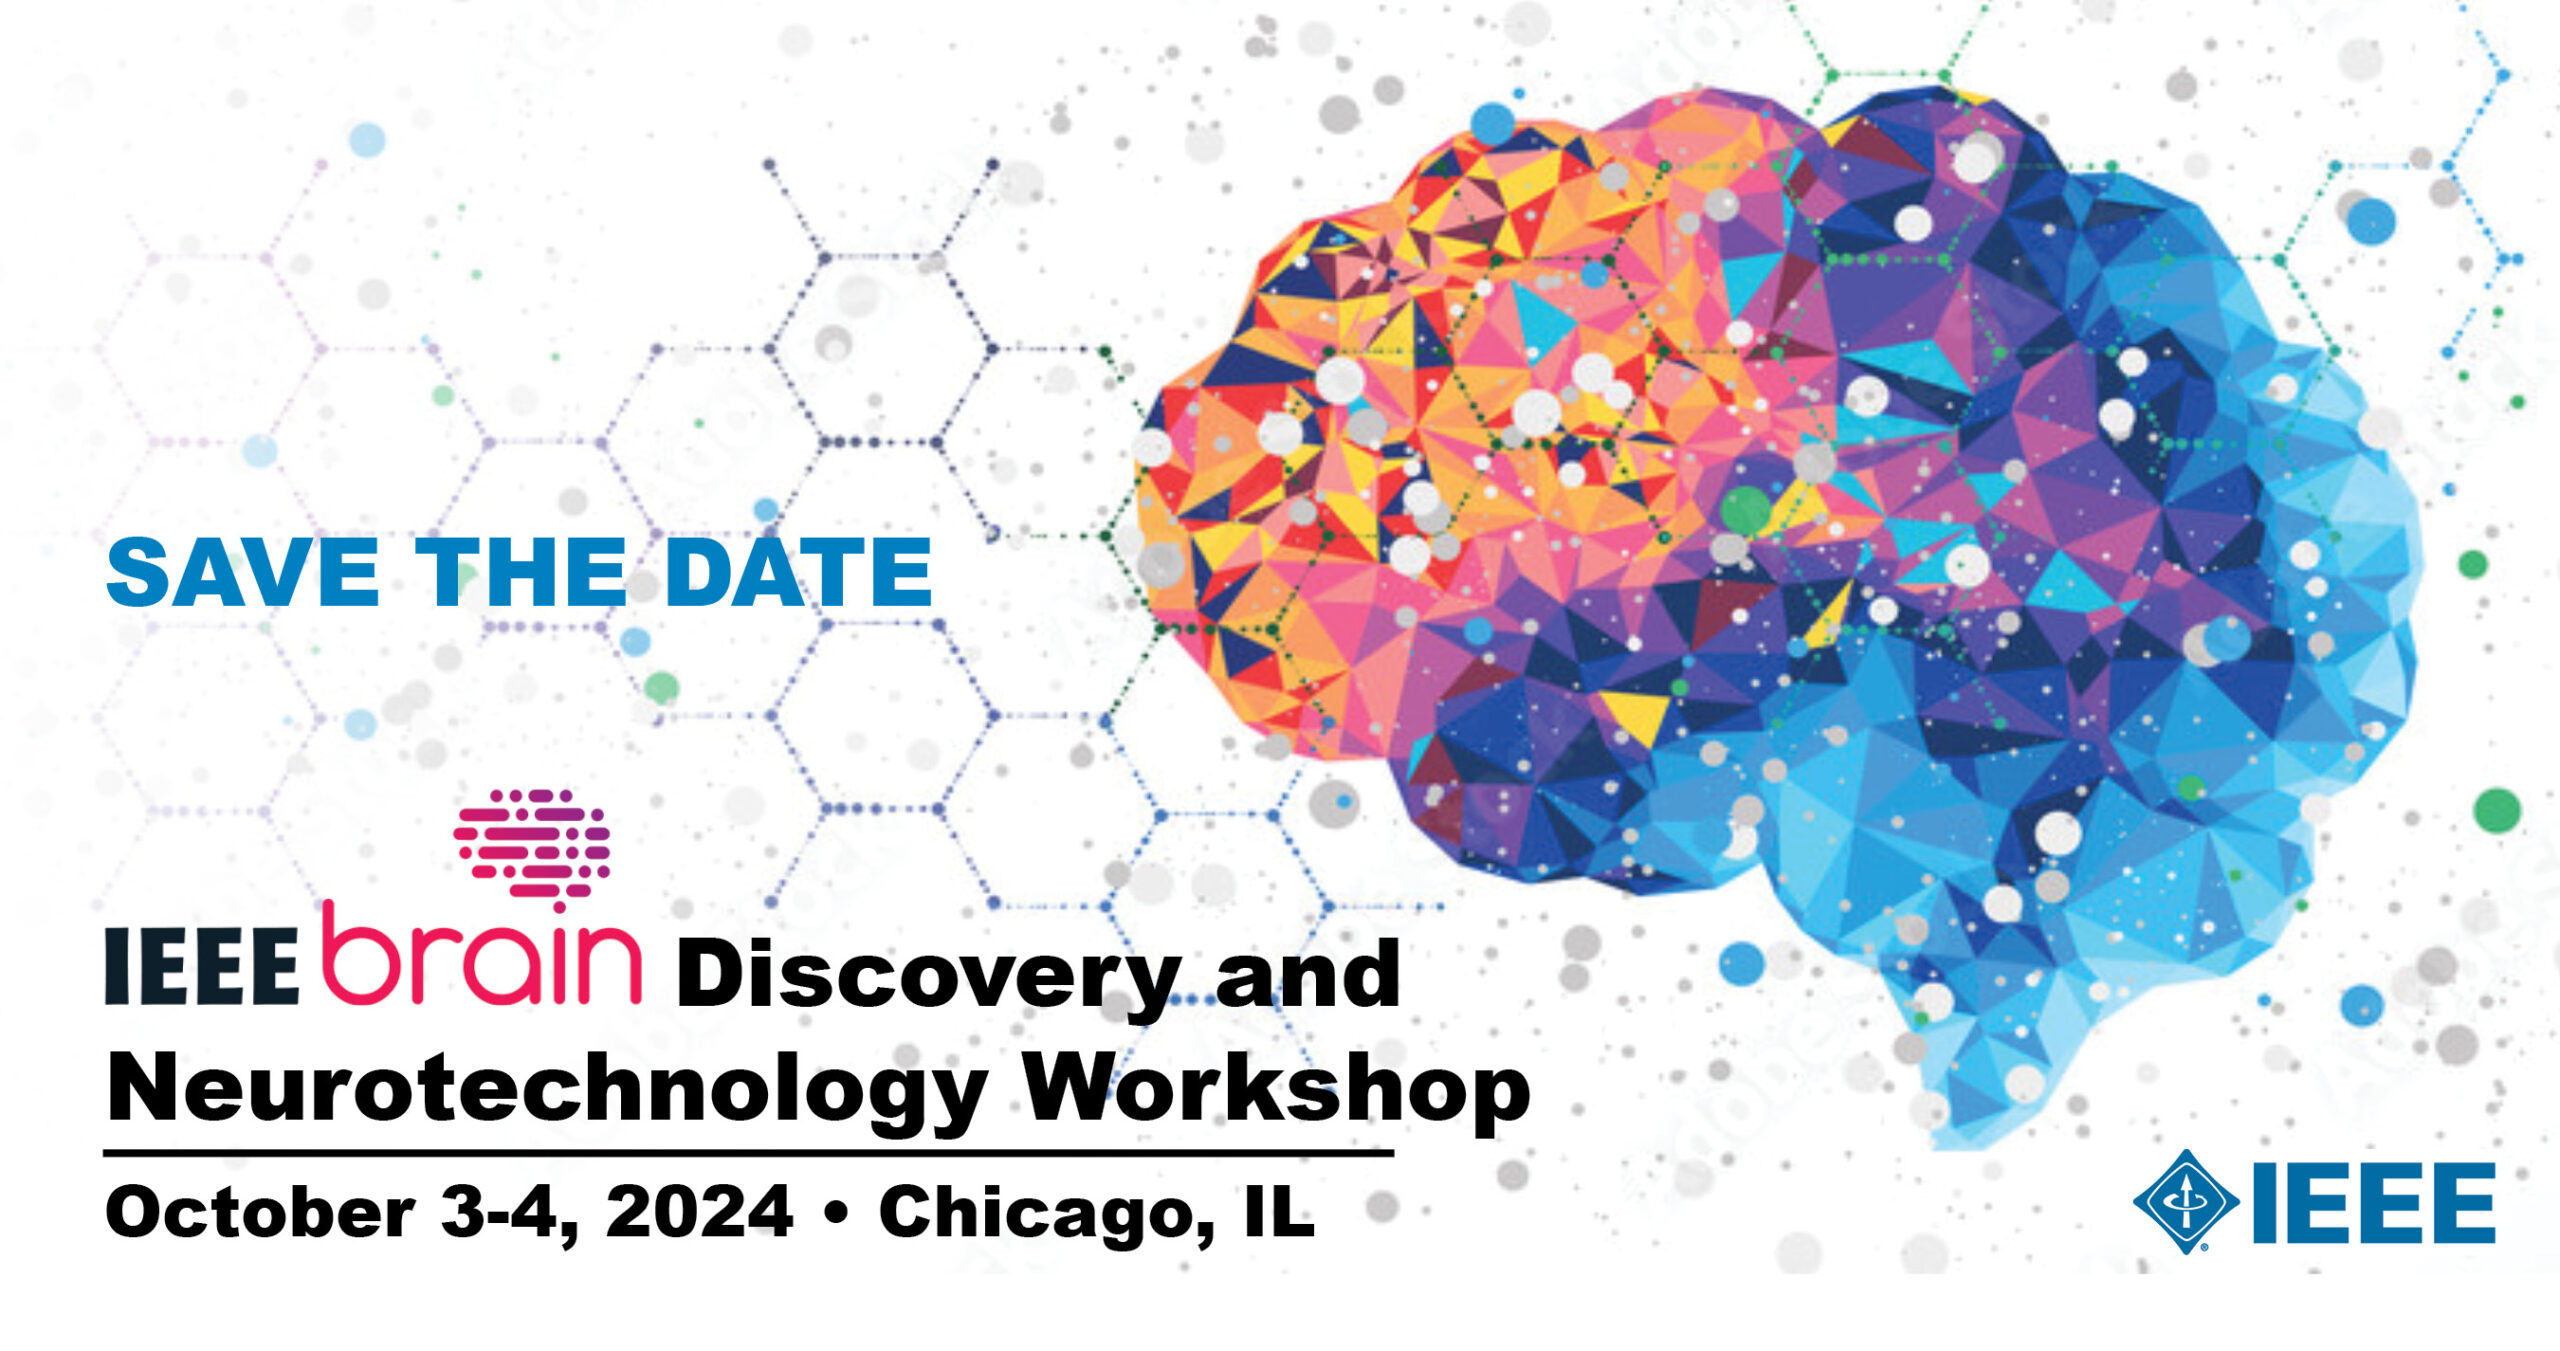 IEEE Brain Discovery and Neurotechnology Workshop 2024